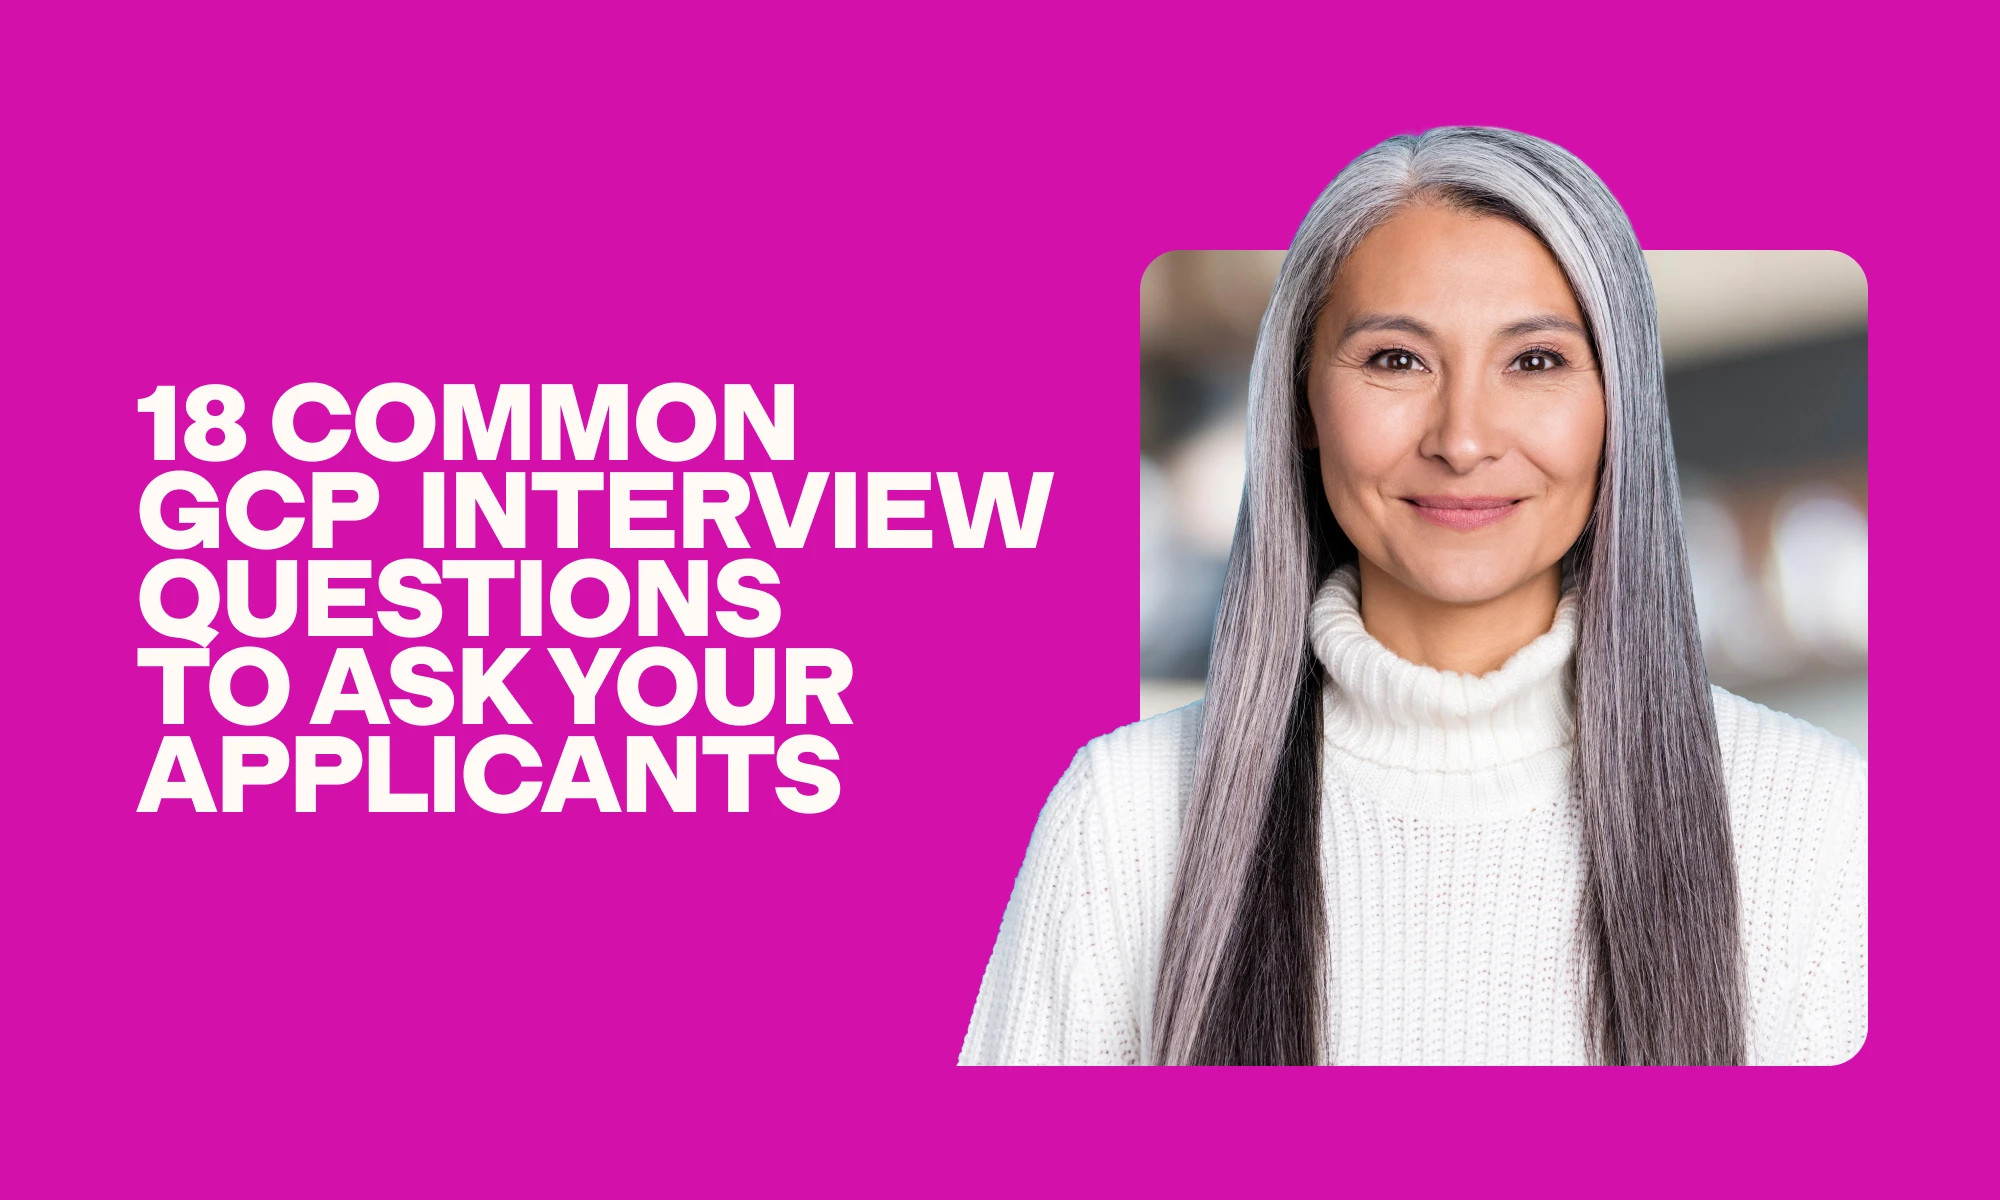 18 common GCP interview questions to ask your applicants